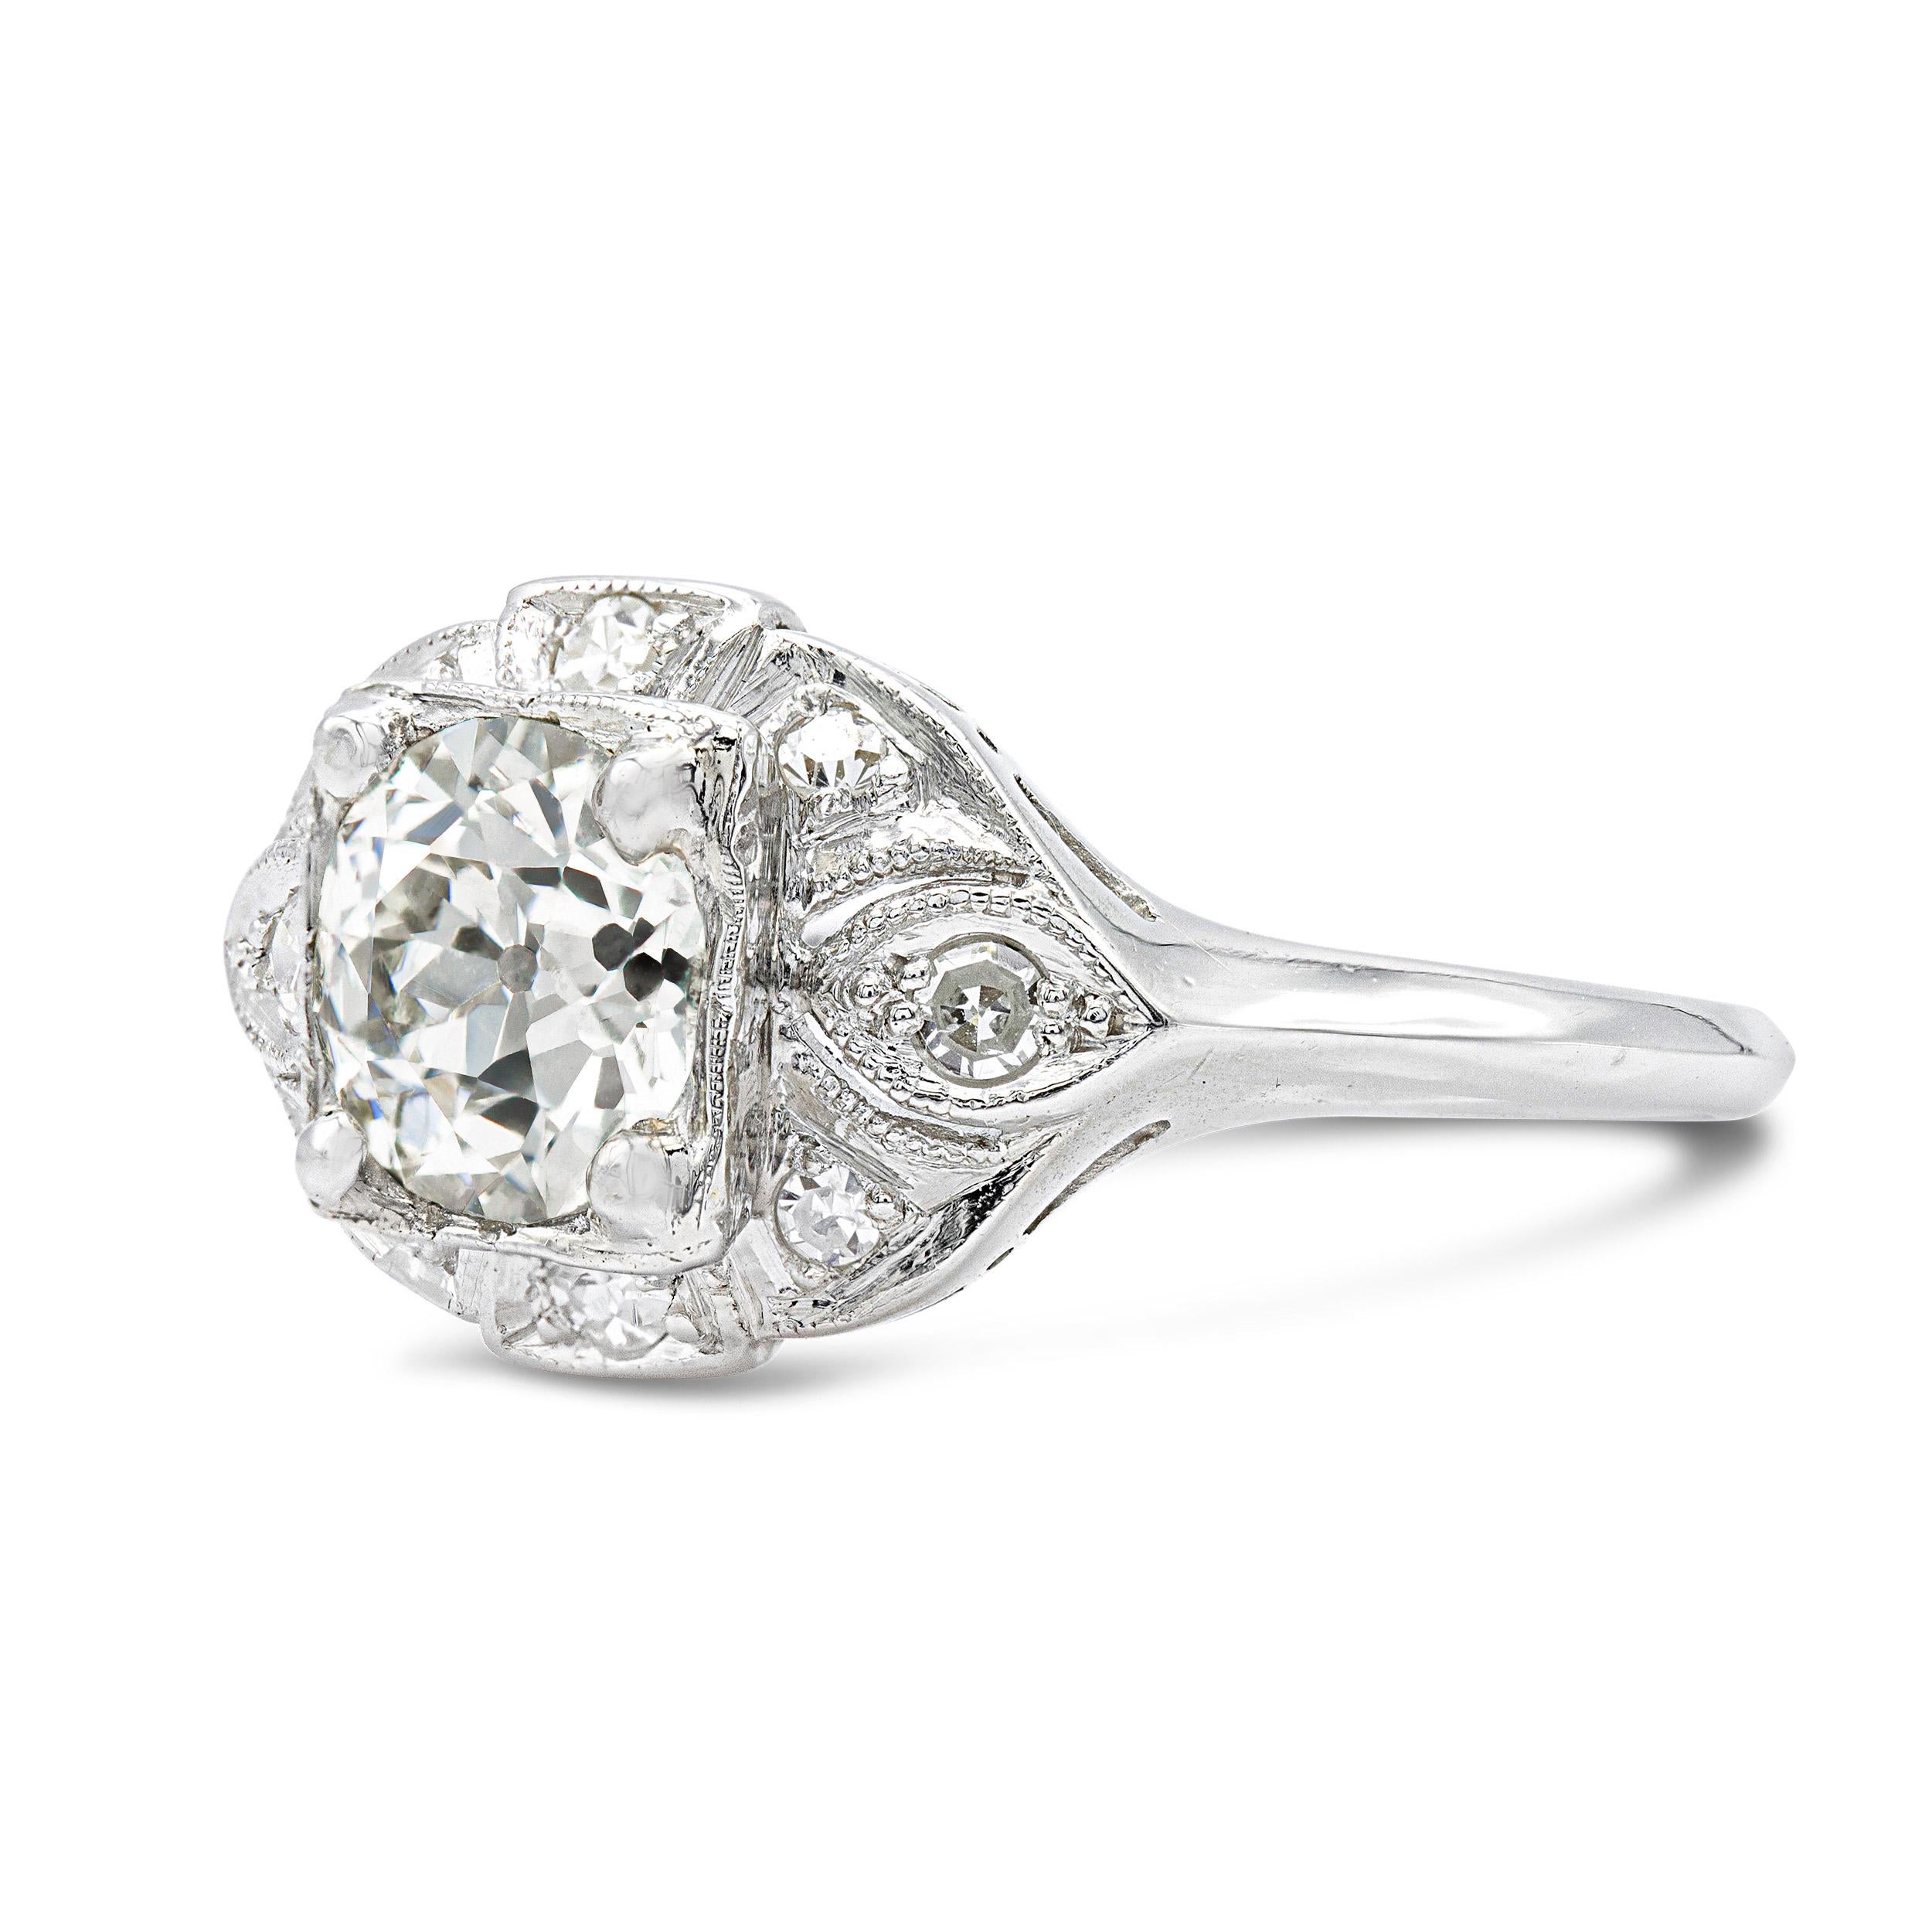 One of the most intriguing deco-era engagement rings styles are framed settings. Boasting romantic metalwork studded with small single cut diamonds, it sits elegant low across the finger. An attractive old Euro, 1.30 carats, with mesmerizing facets